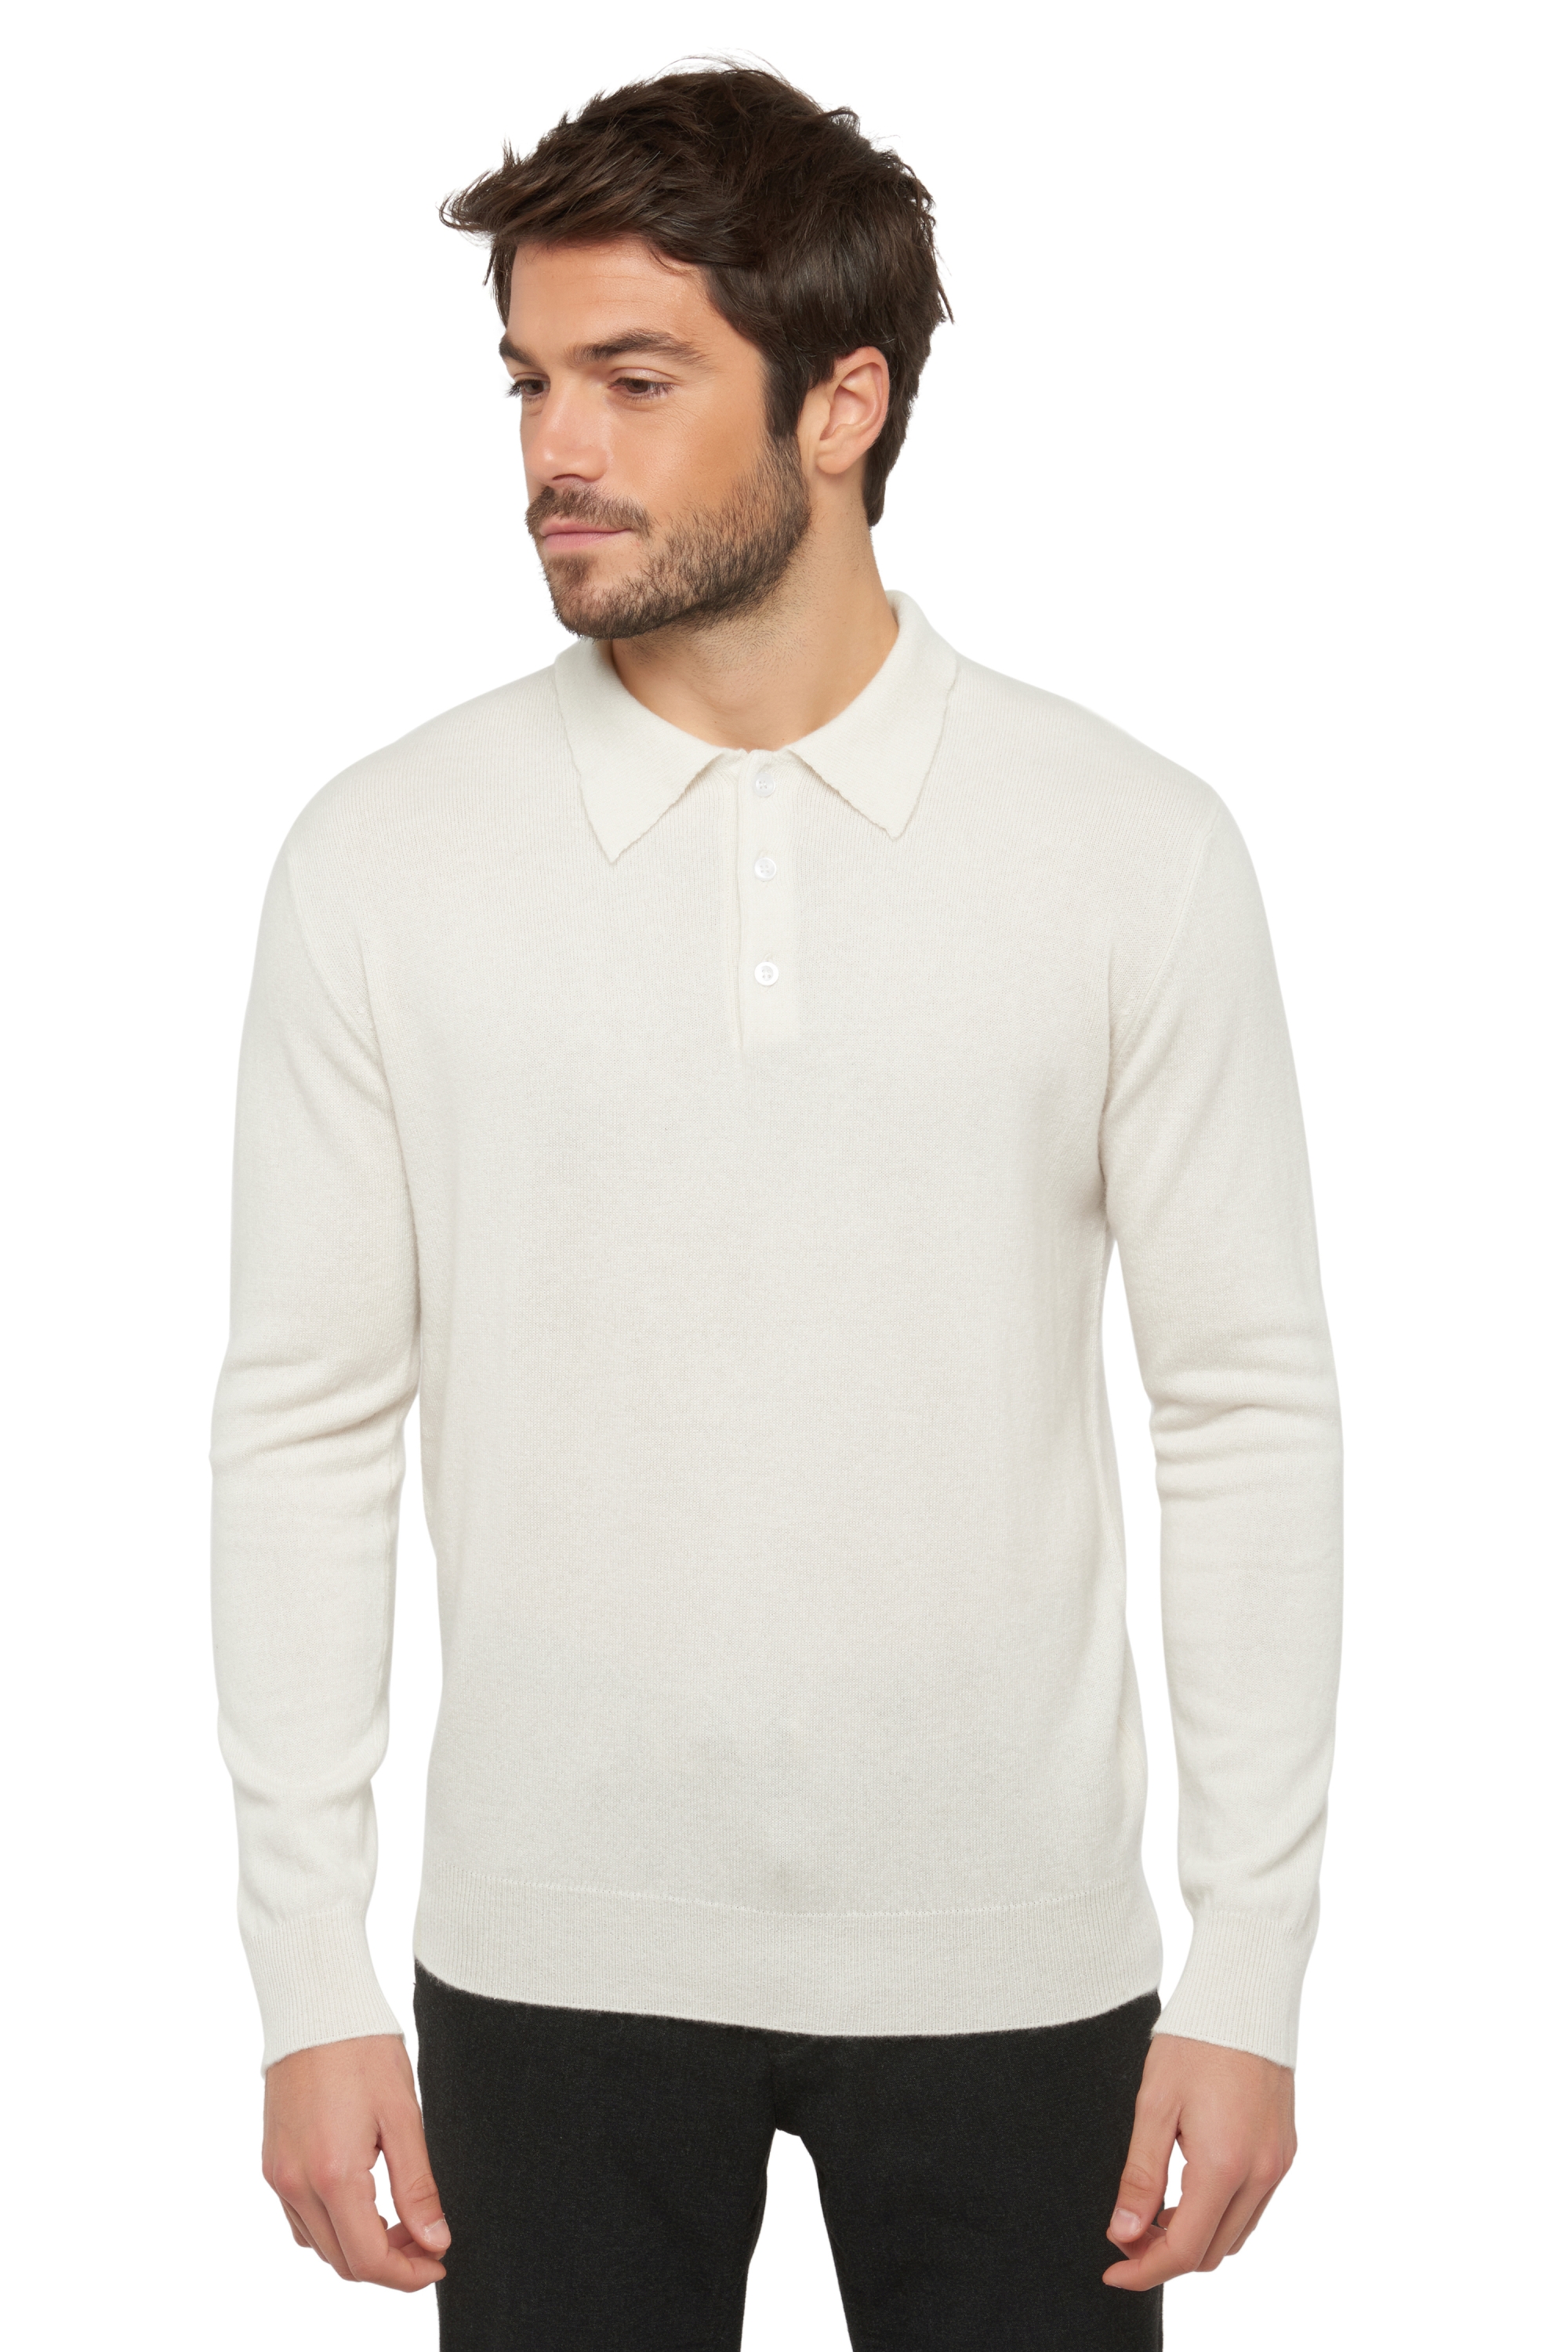 Cashmere men polo style sweaters alexandre off white 4xl